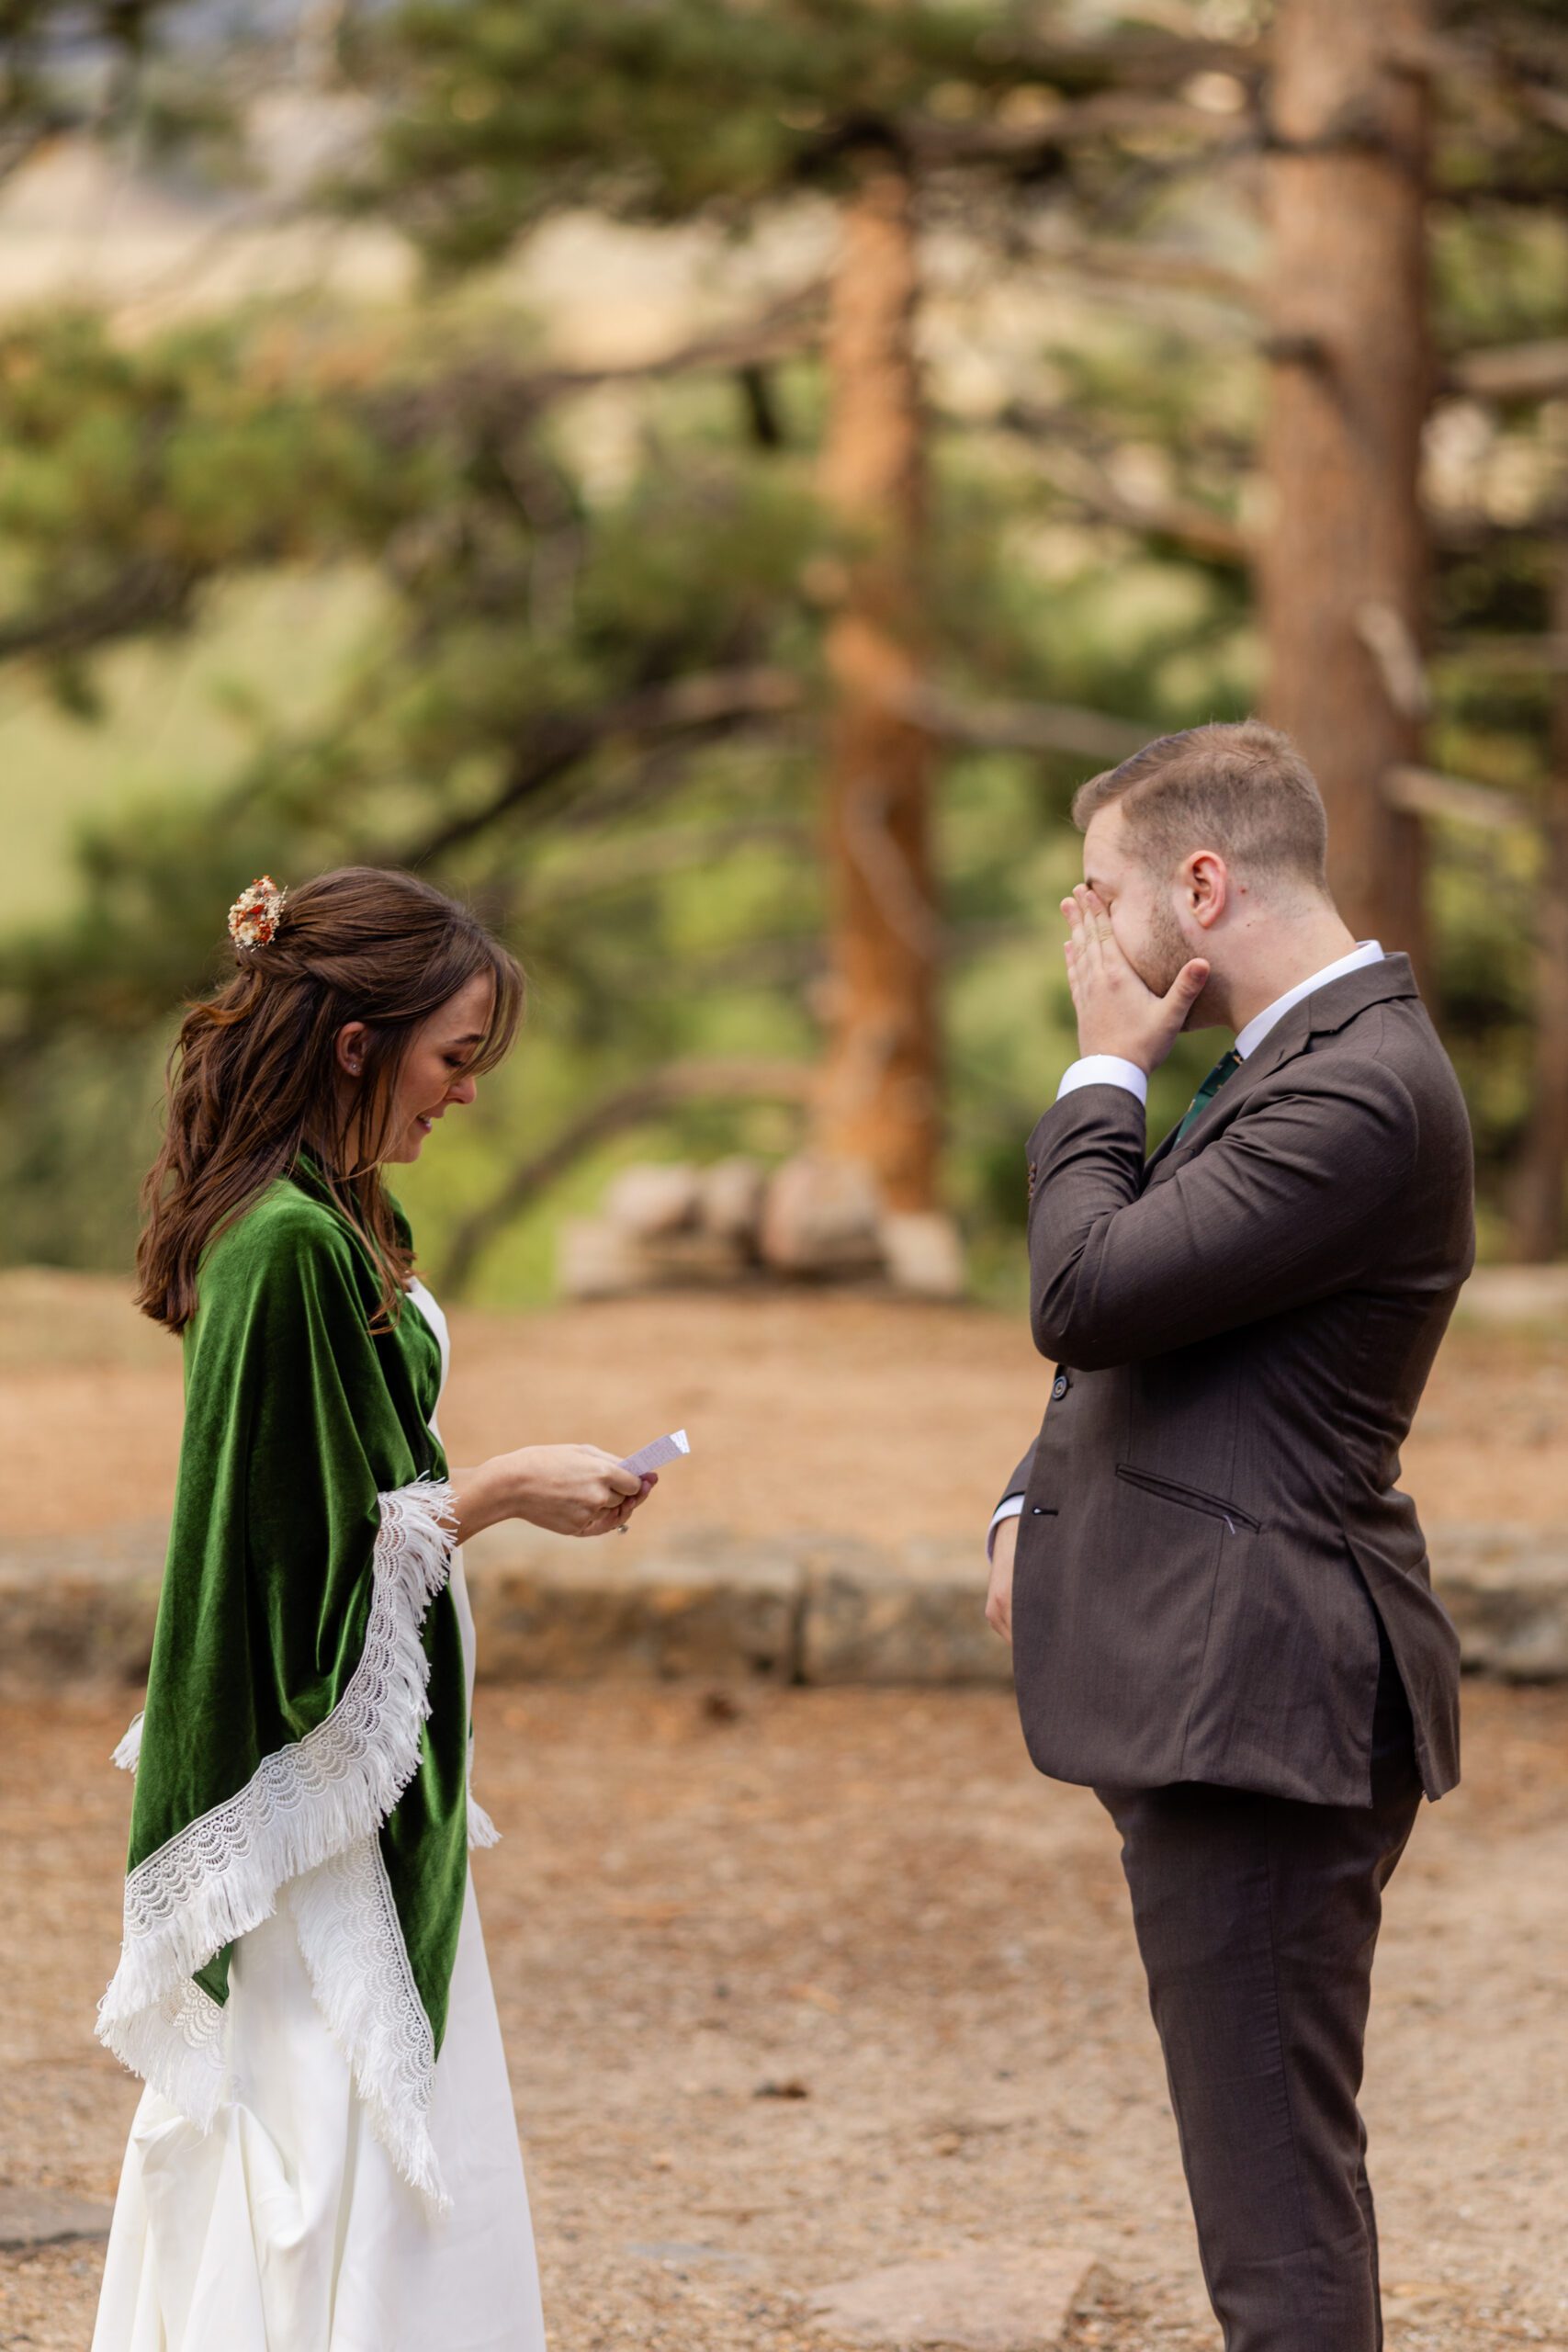 groom reads her vows to the groom who is wiping a tear from his eye at their Dream Lake elopement.